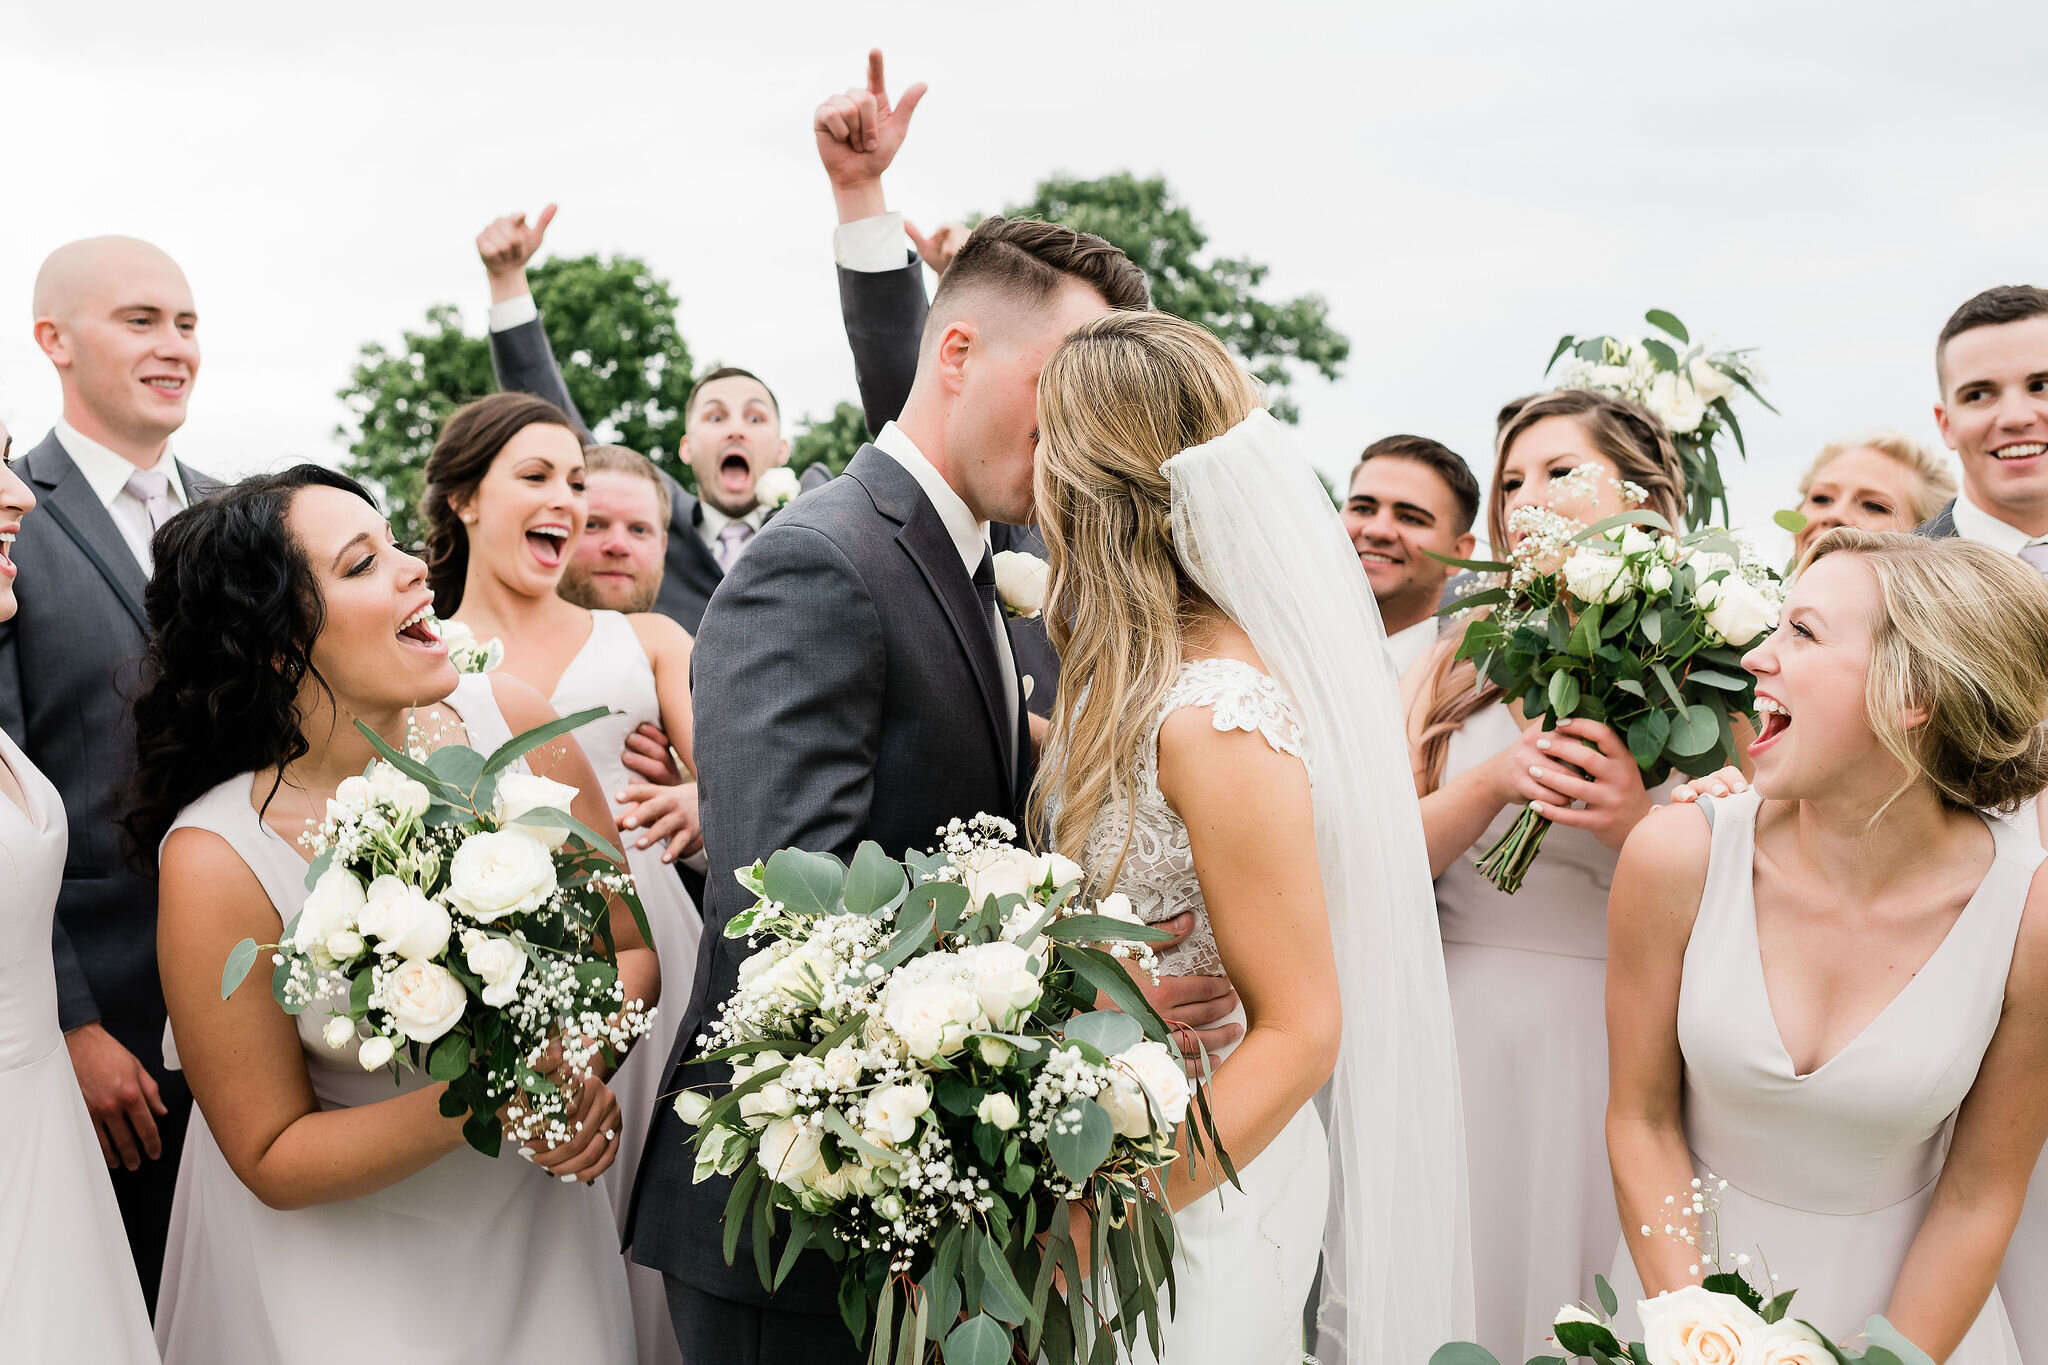 Bride and groom kiss while wedding party cheers